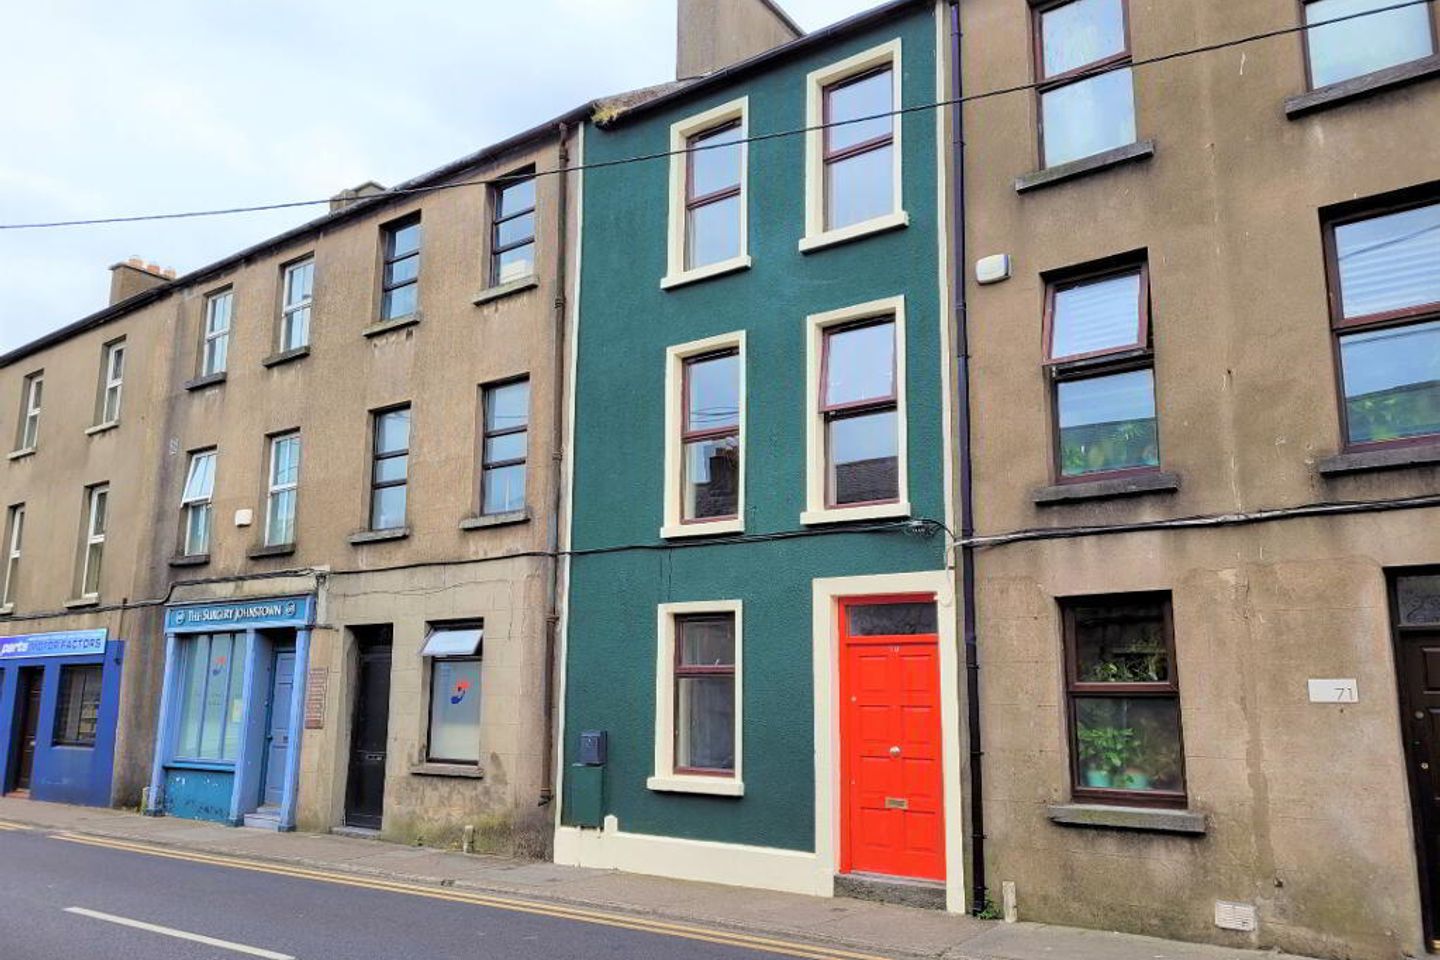 70 Johnstown, Waterford City, Co. Waterford